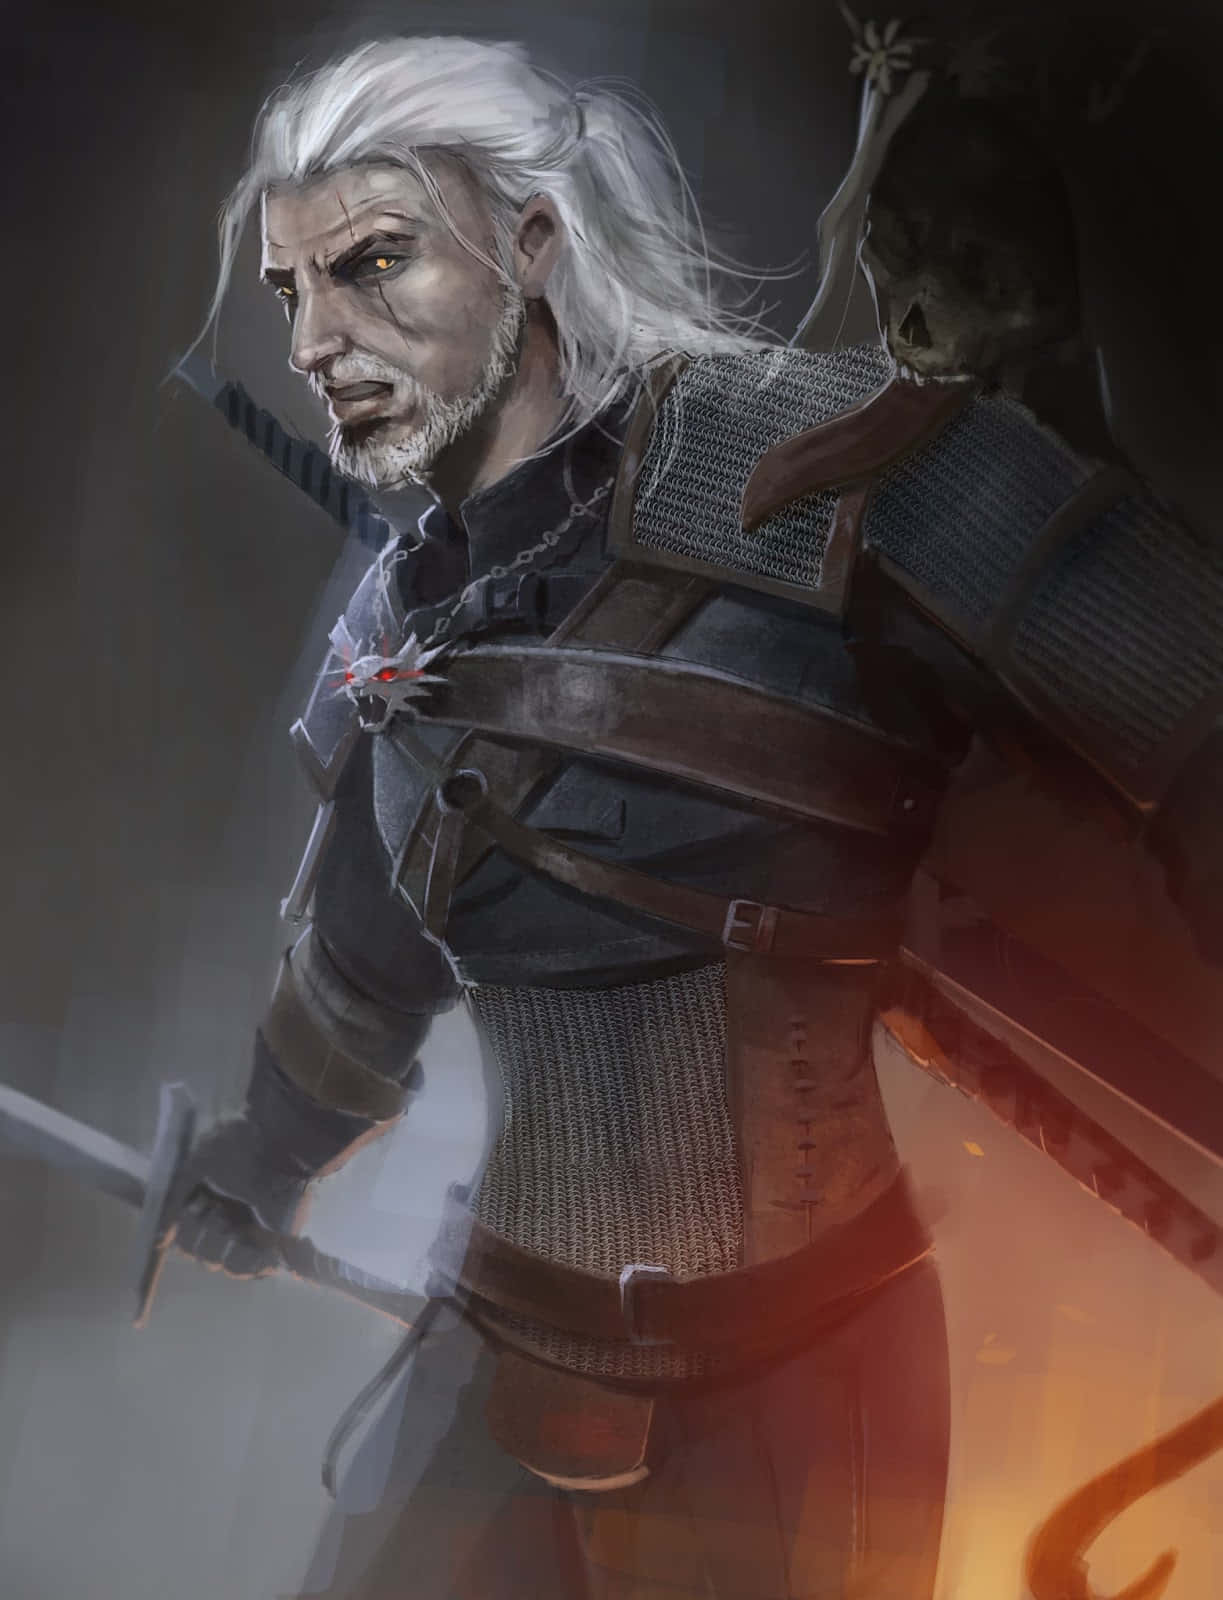 The Witcher, Geralt Of Rivia Standing With Sword In Hand, Ready For Battle. Wallpaper